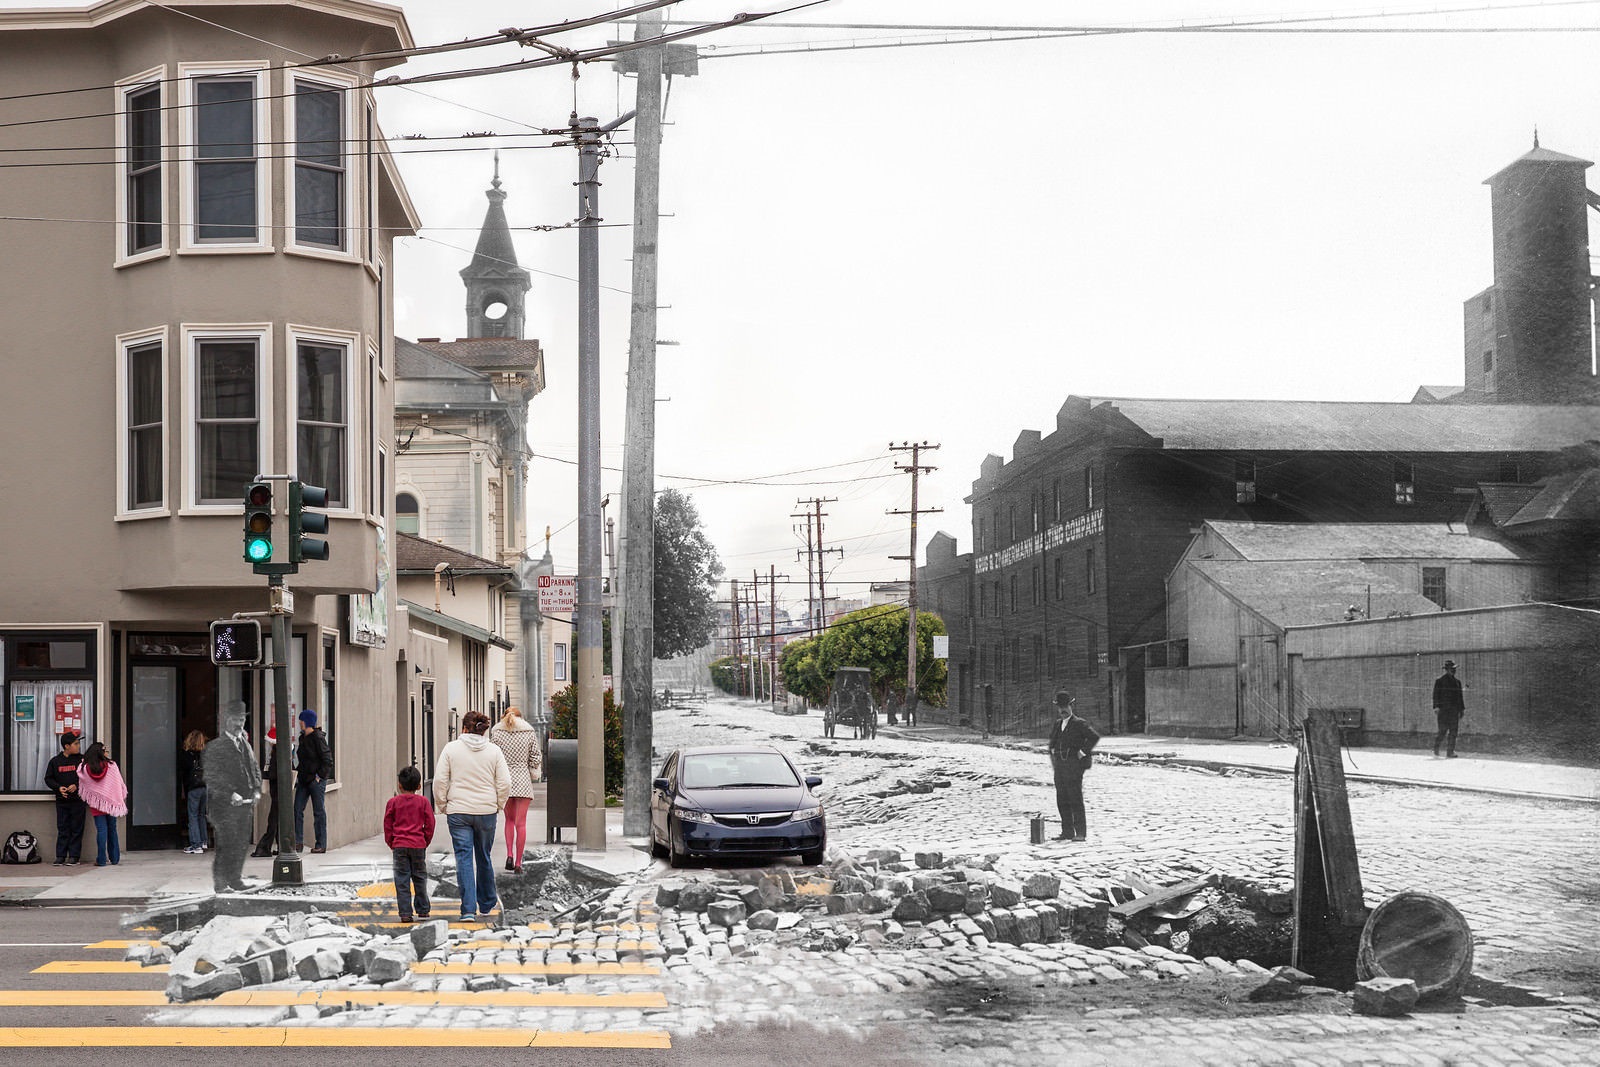 Some lumber and barrels stuffed in a sinkhole warm pedestrians and carrianges of the hazzard on 18th and Van Ness.